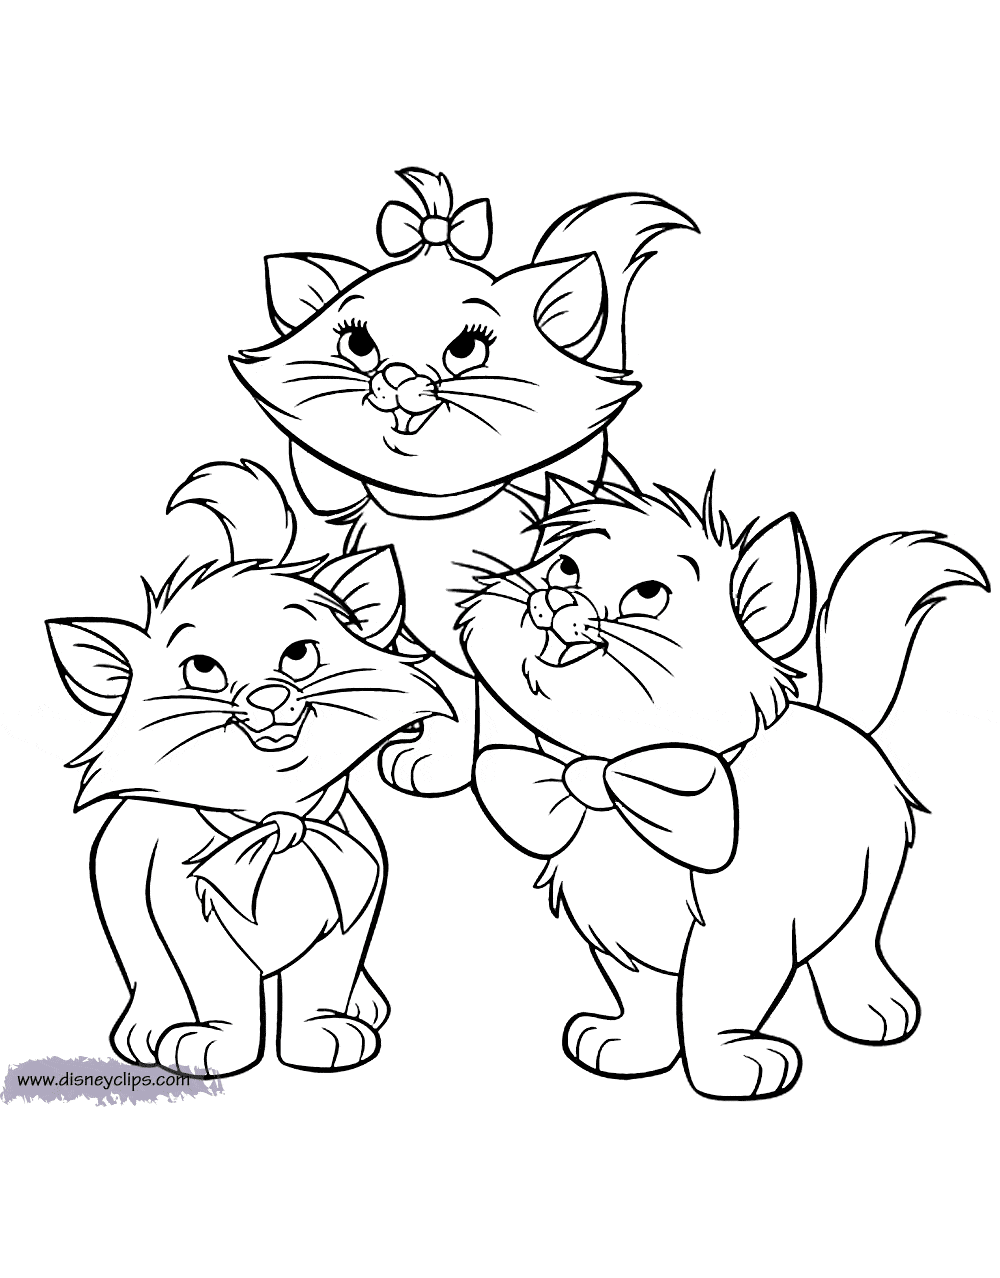 The Aristocats Printable Coloring Pages Cat Coloring Page Disney Princess Coloring Pages Horse Coloring Pages